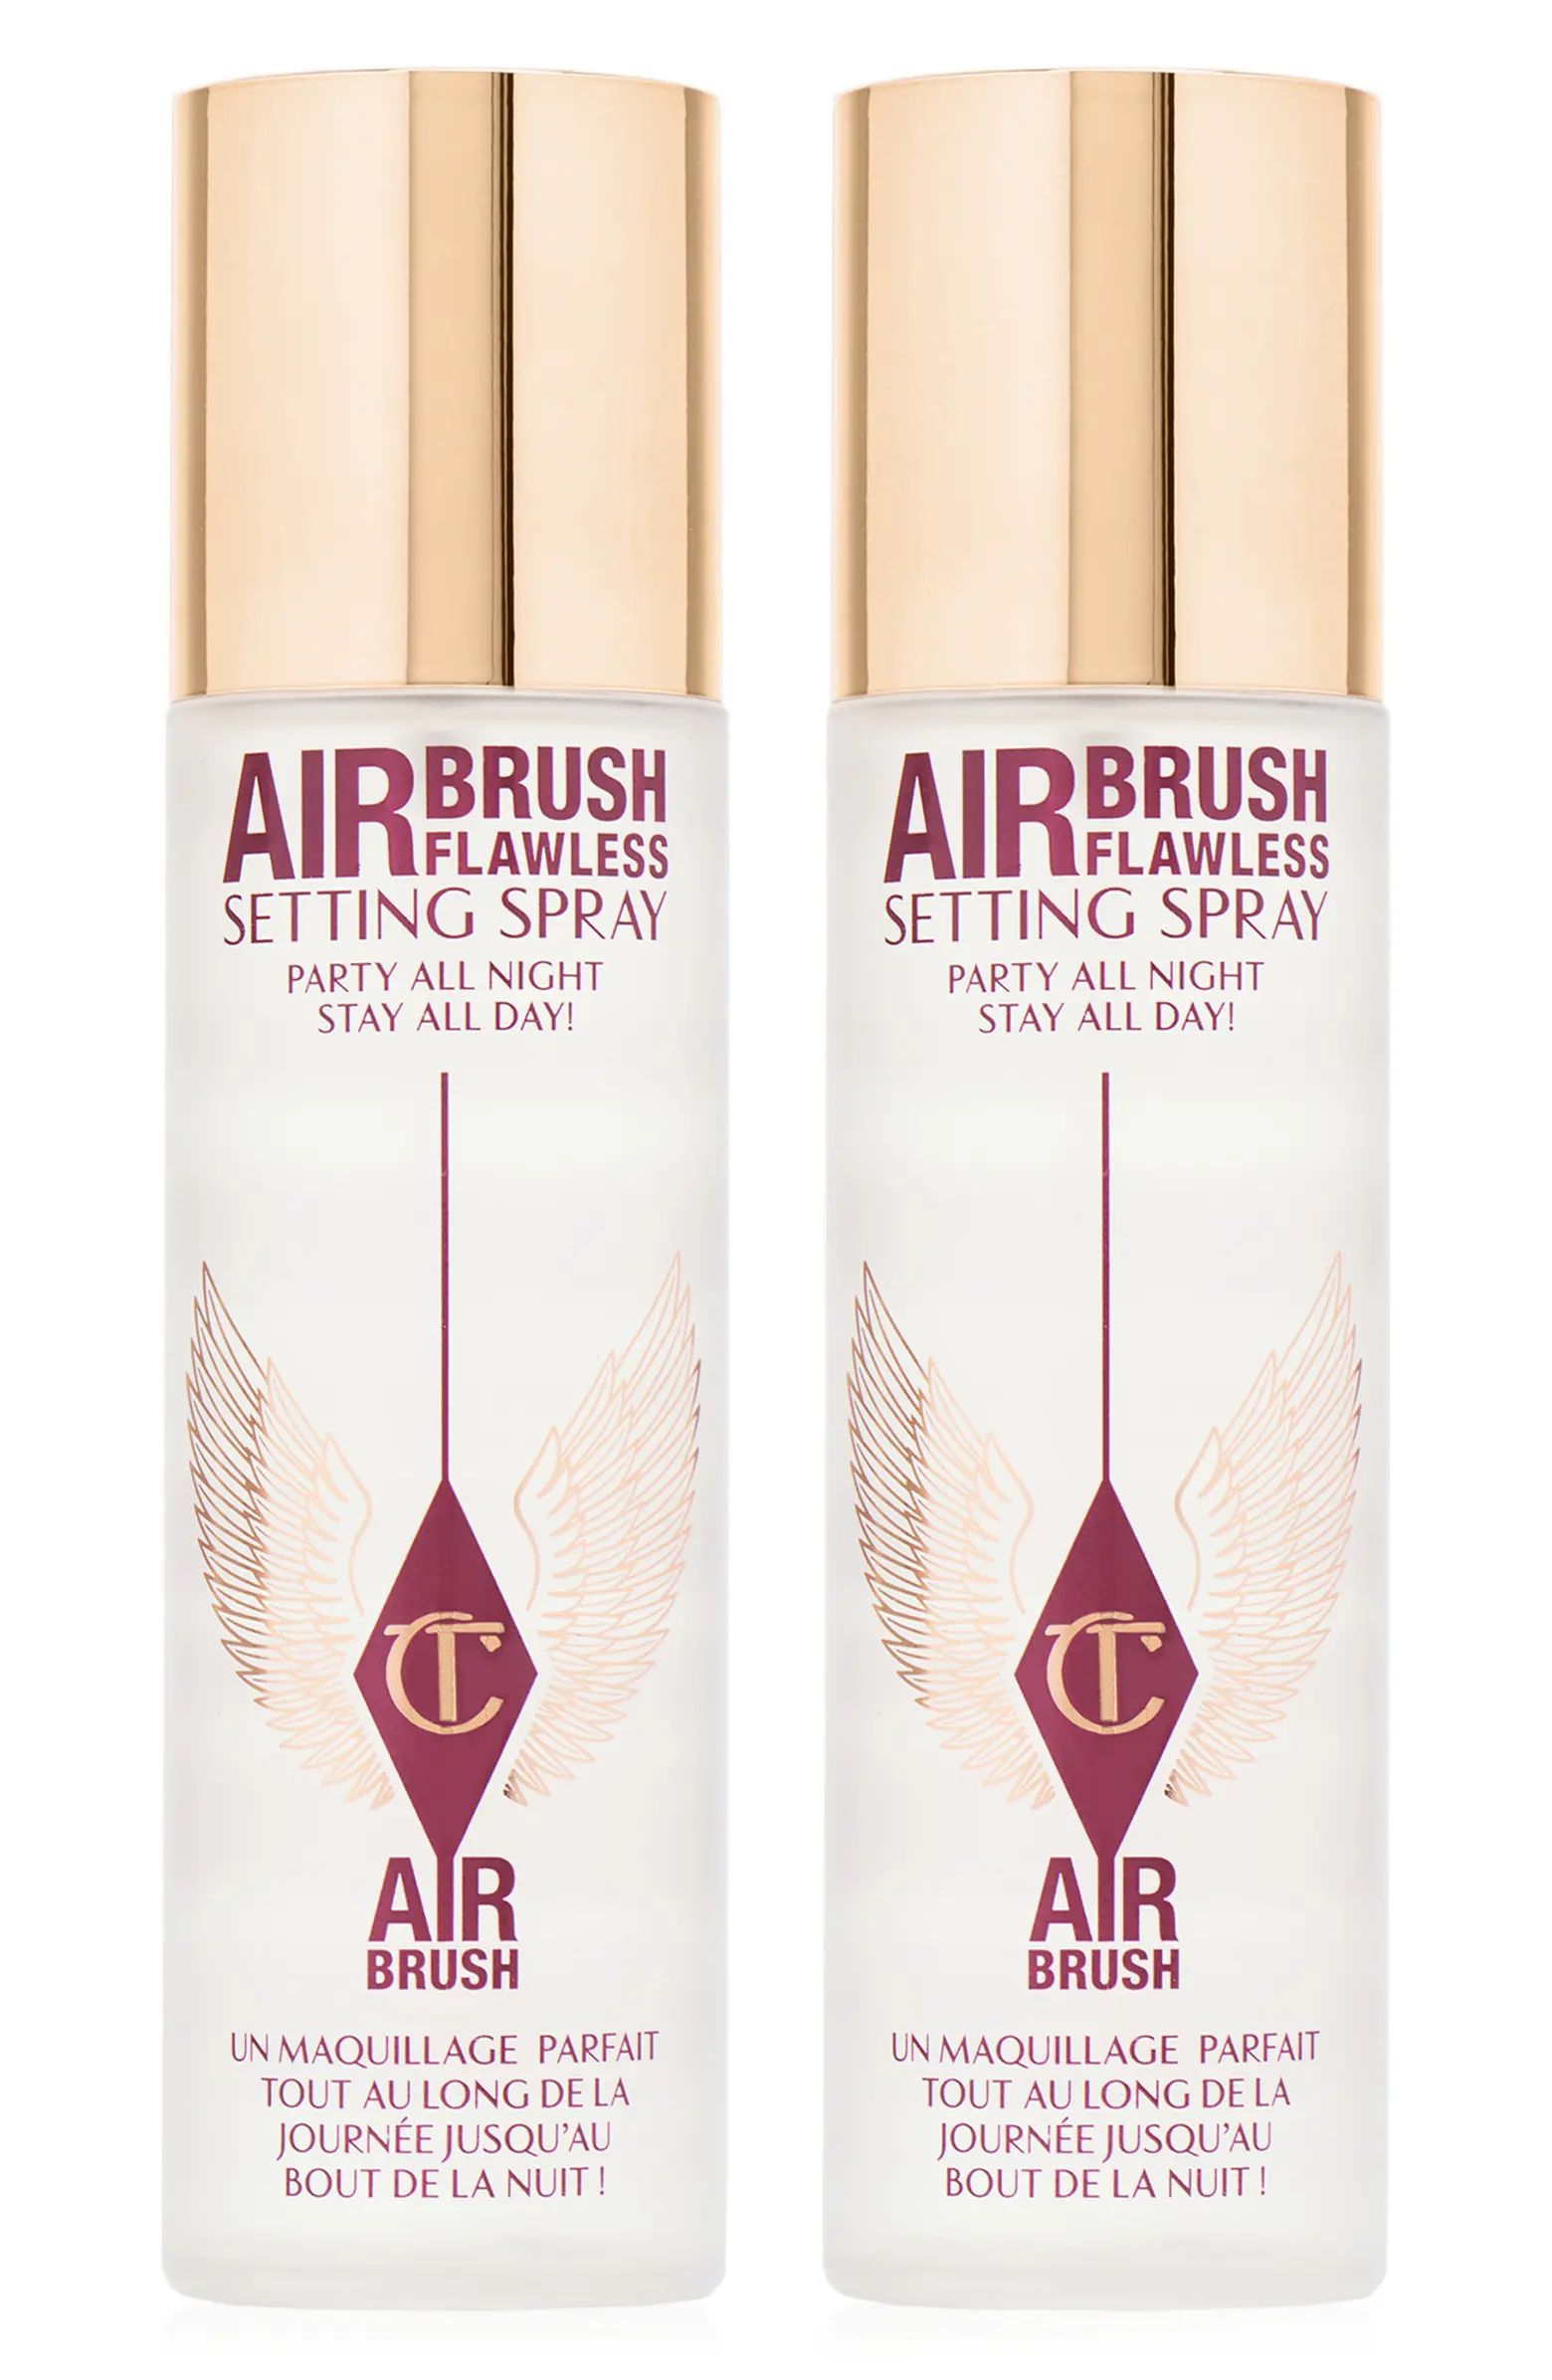 Charlotte Tilbury Airbrush Flawless Makeup Setting Spray Duo $76 Value | Nordstrom | Nordstrom